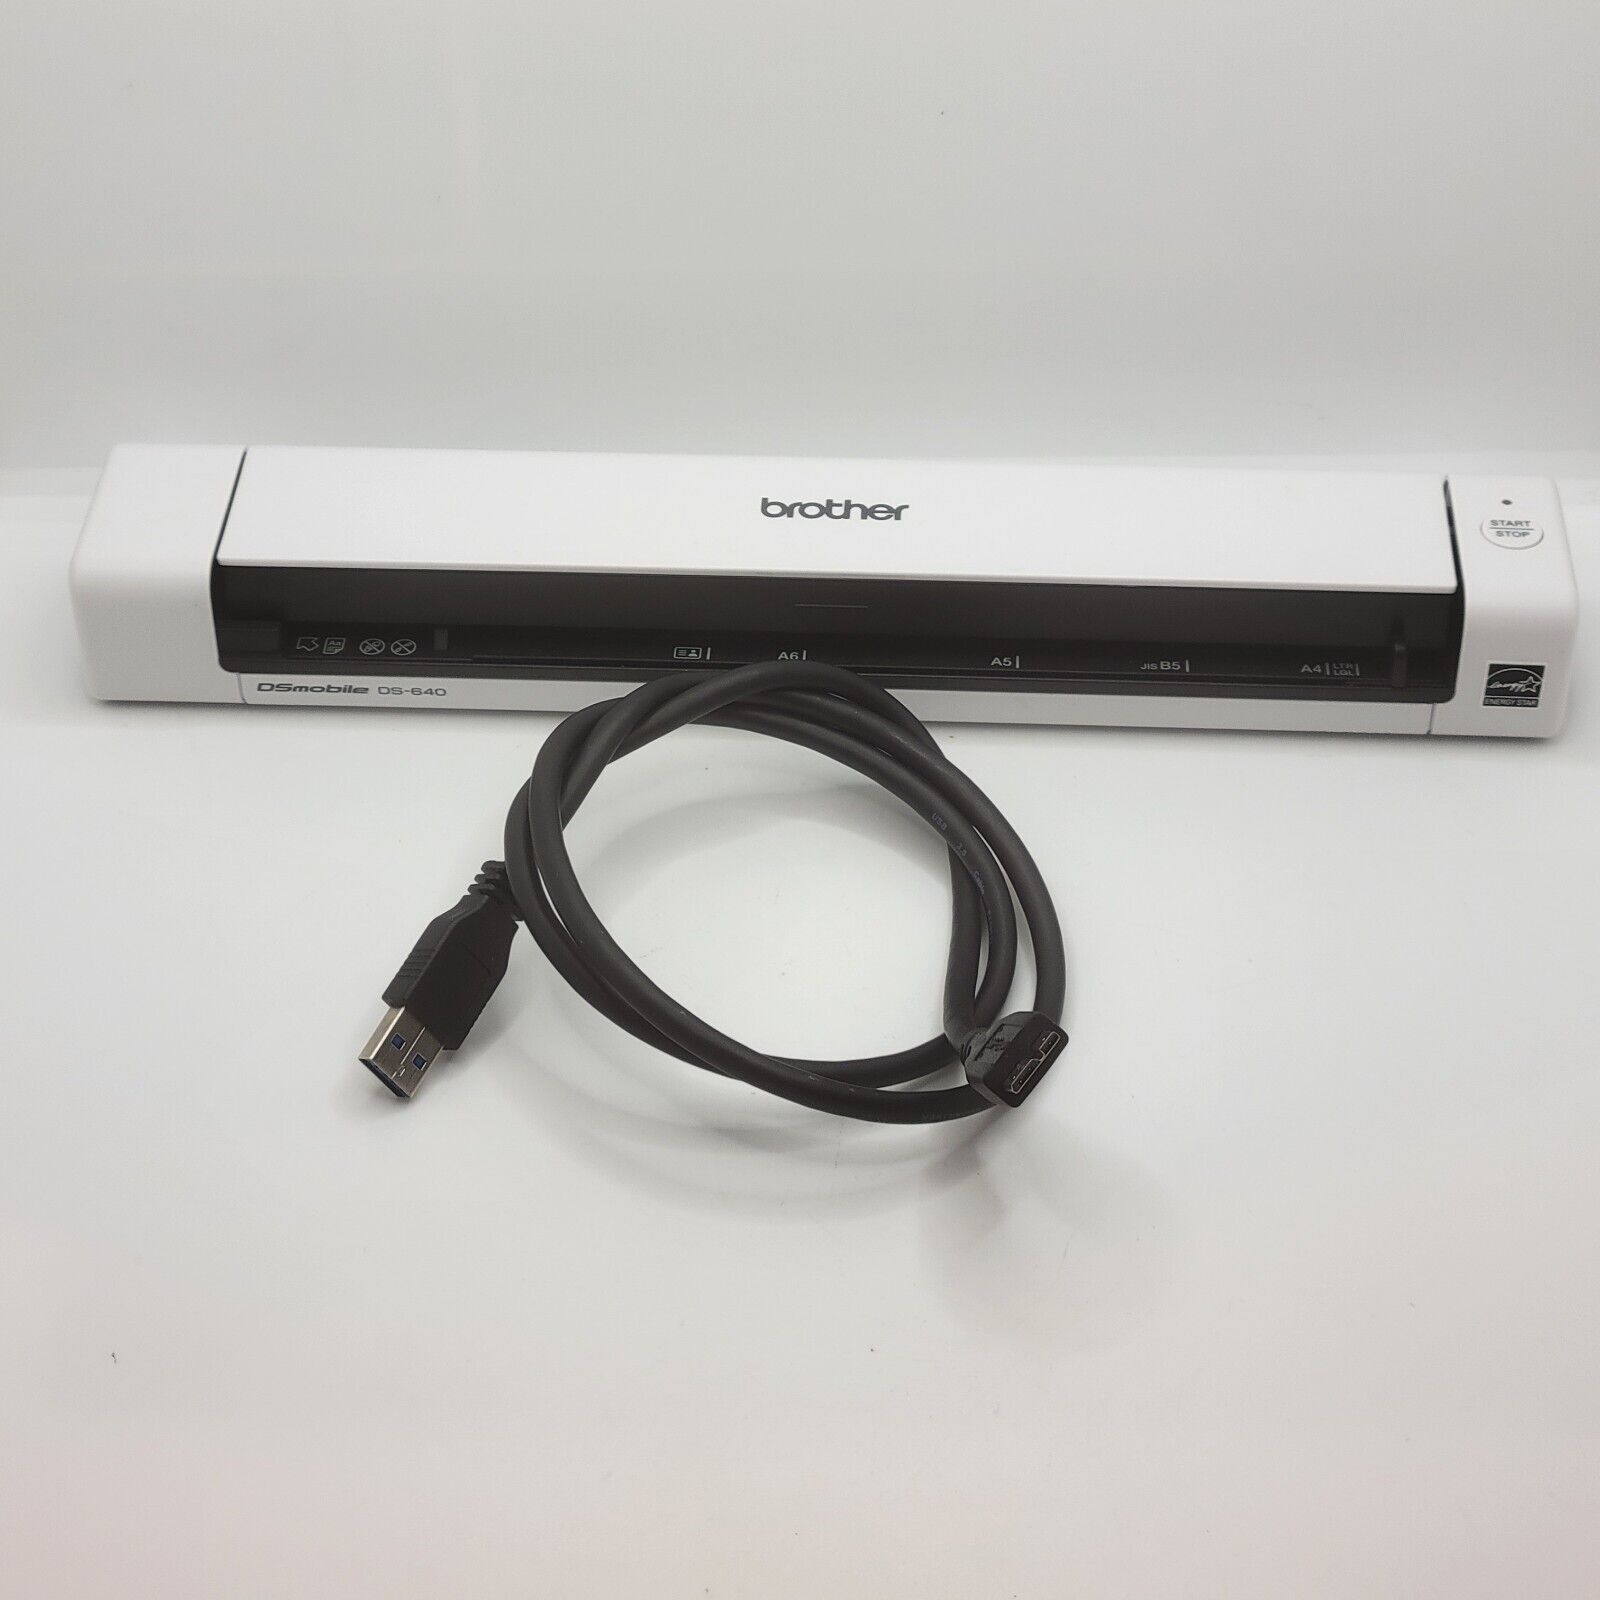 Brother DS-640 Compact Mobile Document Scanner White With Cable TESTED WORKING